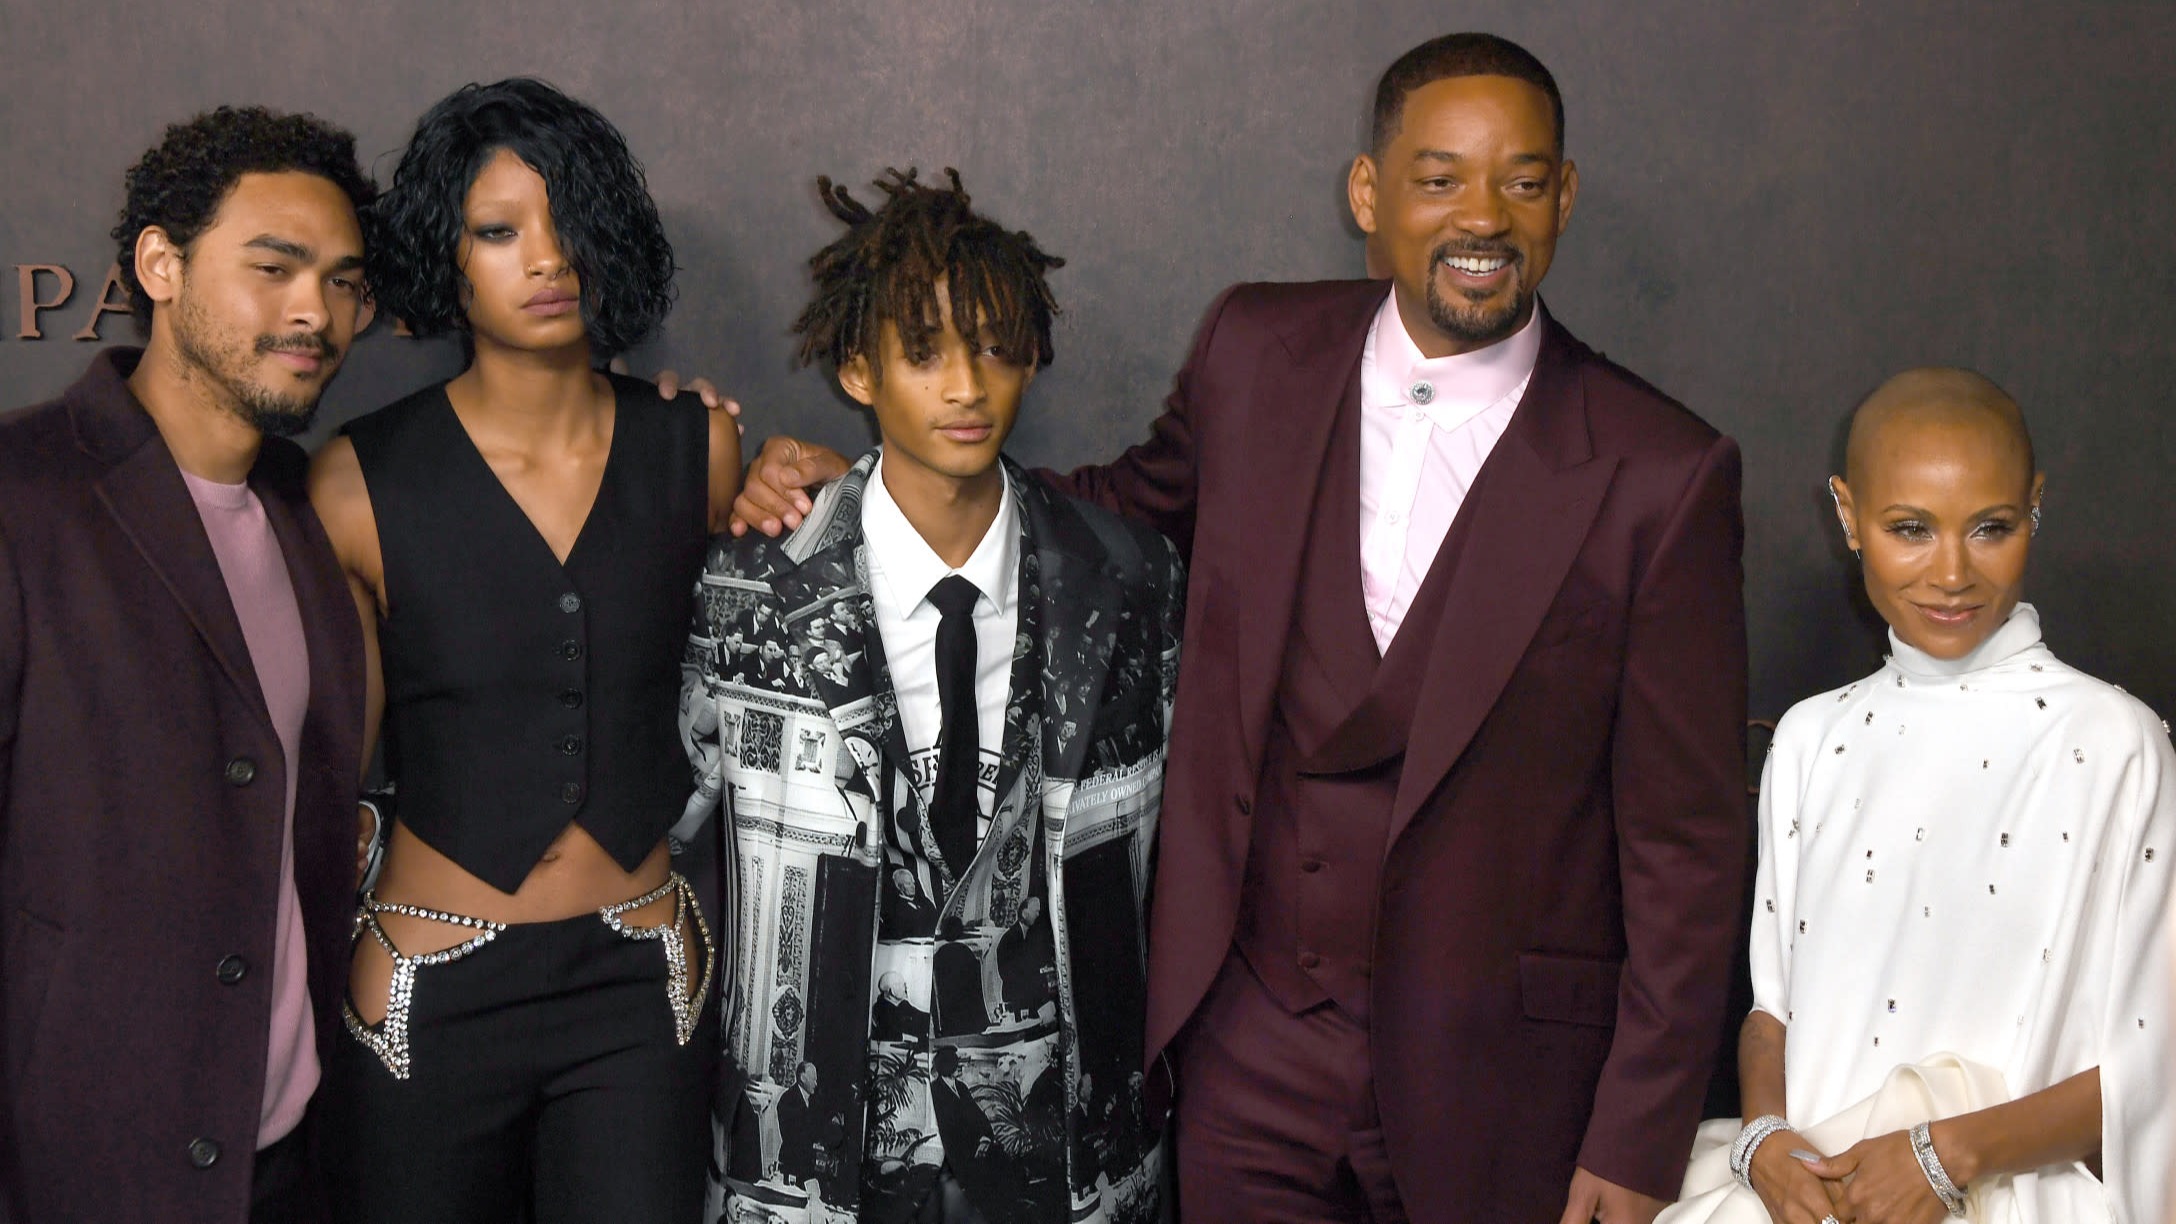 Will and Jada Pinkett Smith Do Psychedelics with Their Family, According to Their Son Jaden